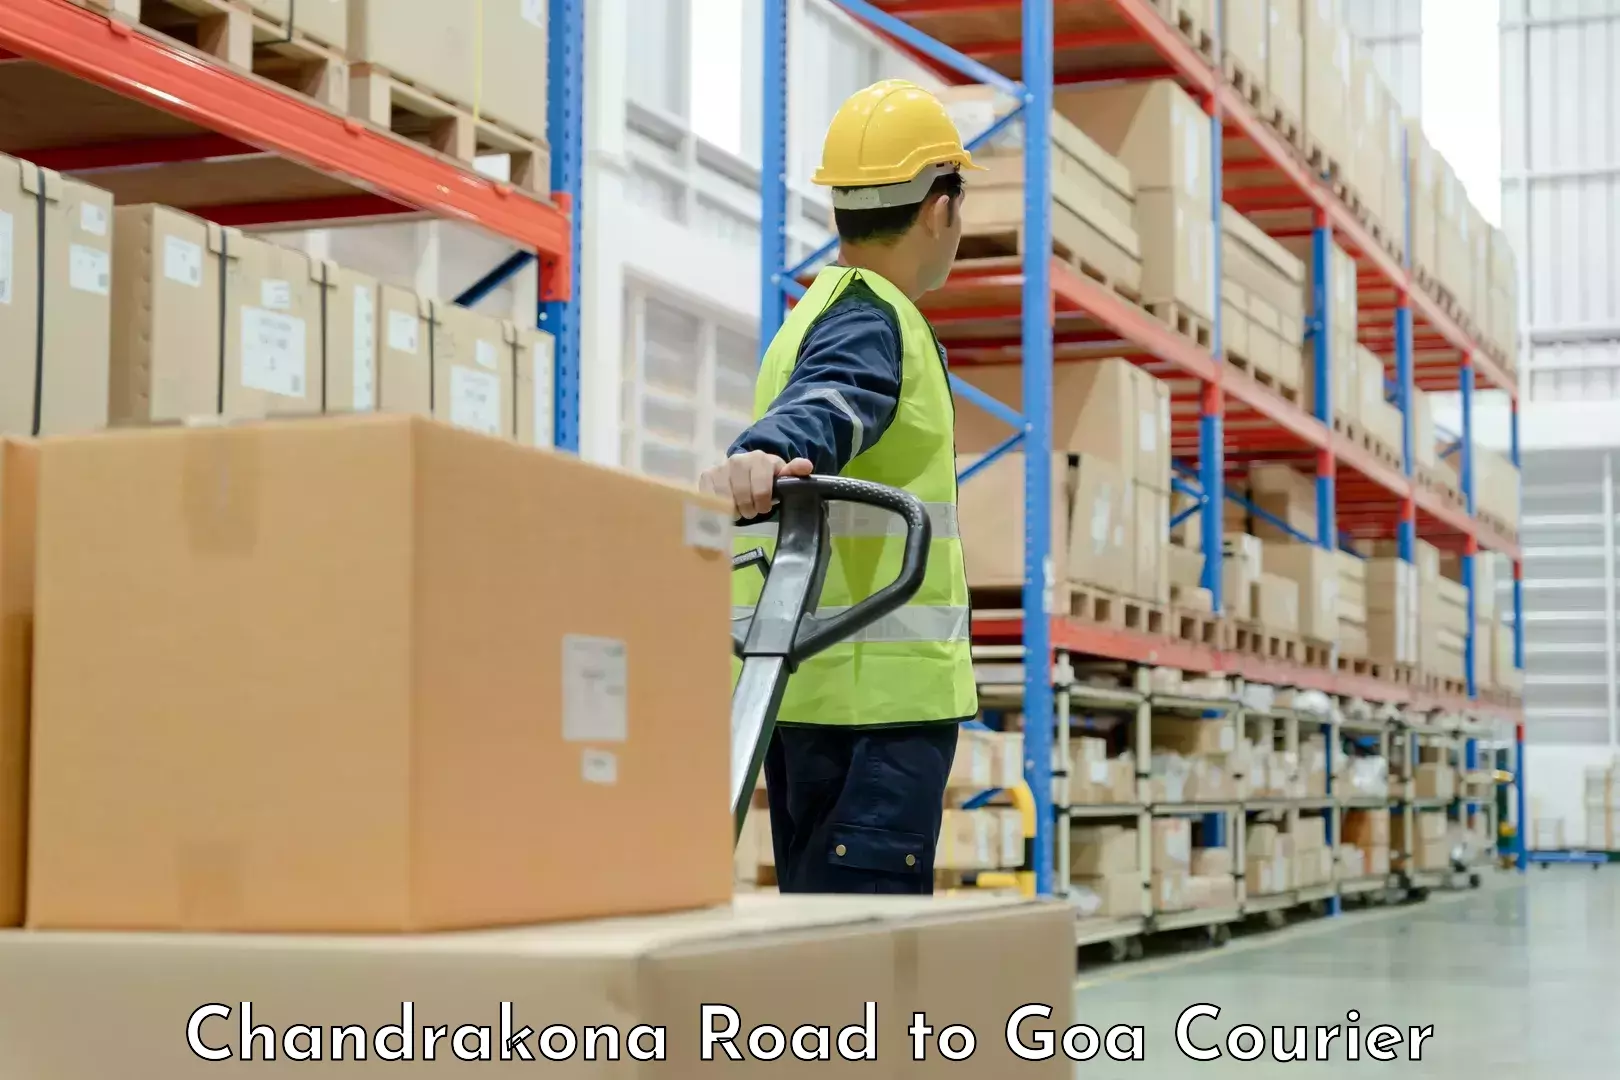 Comprehensive relocation services in Chandrakona Road to Bardez